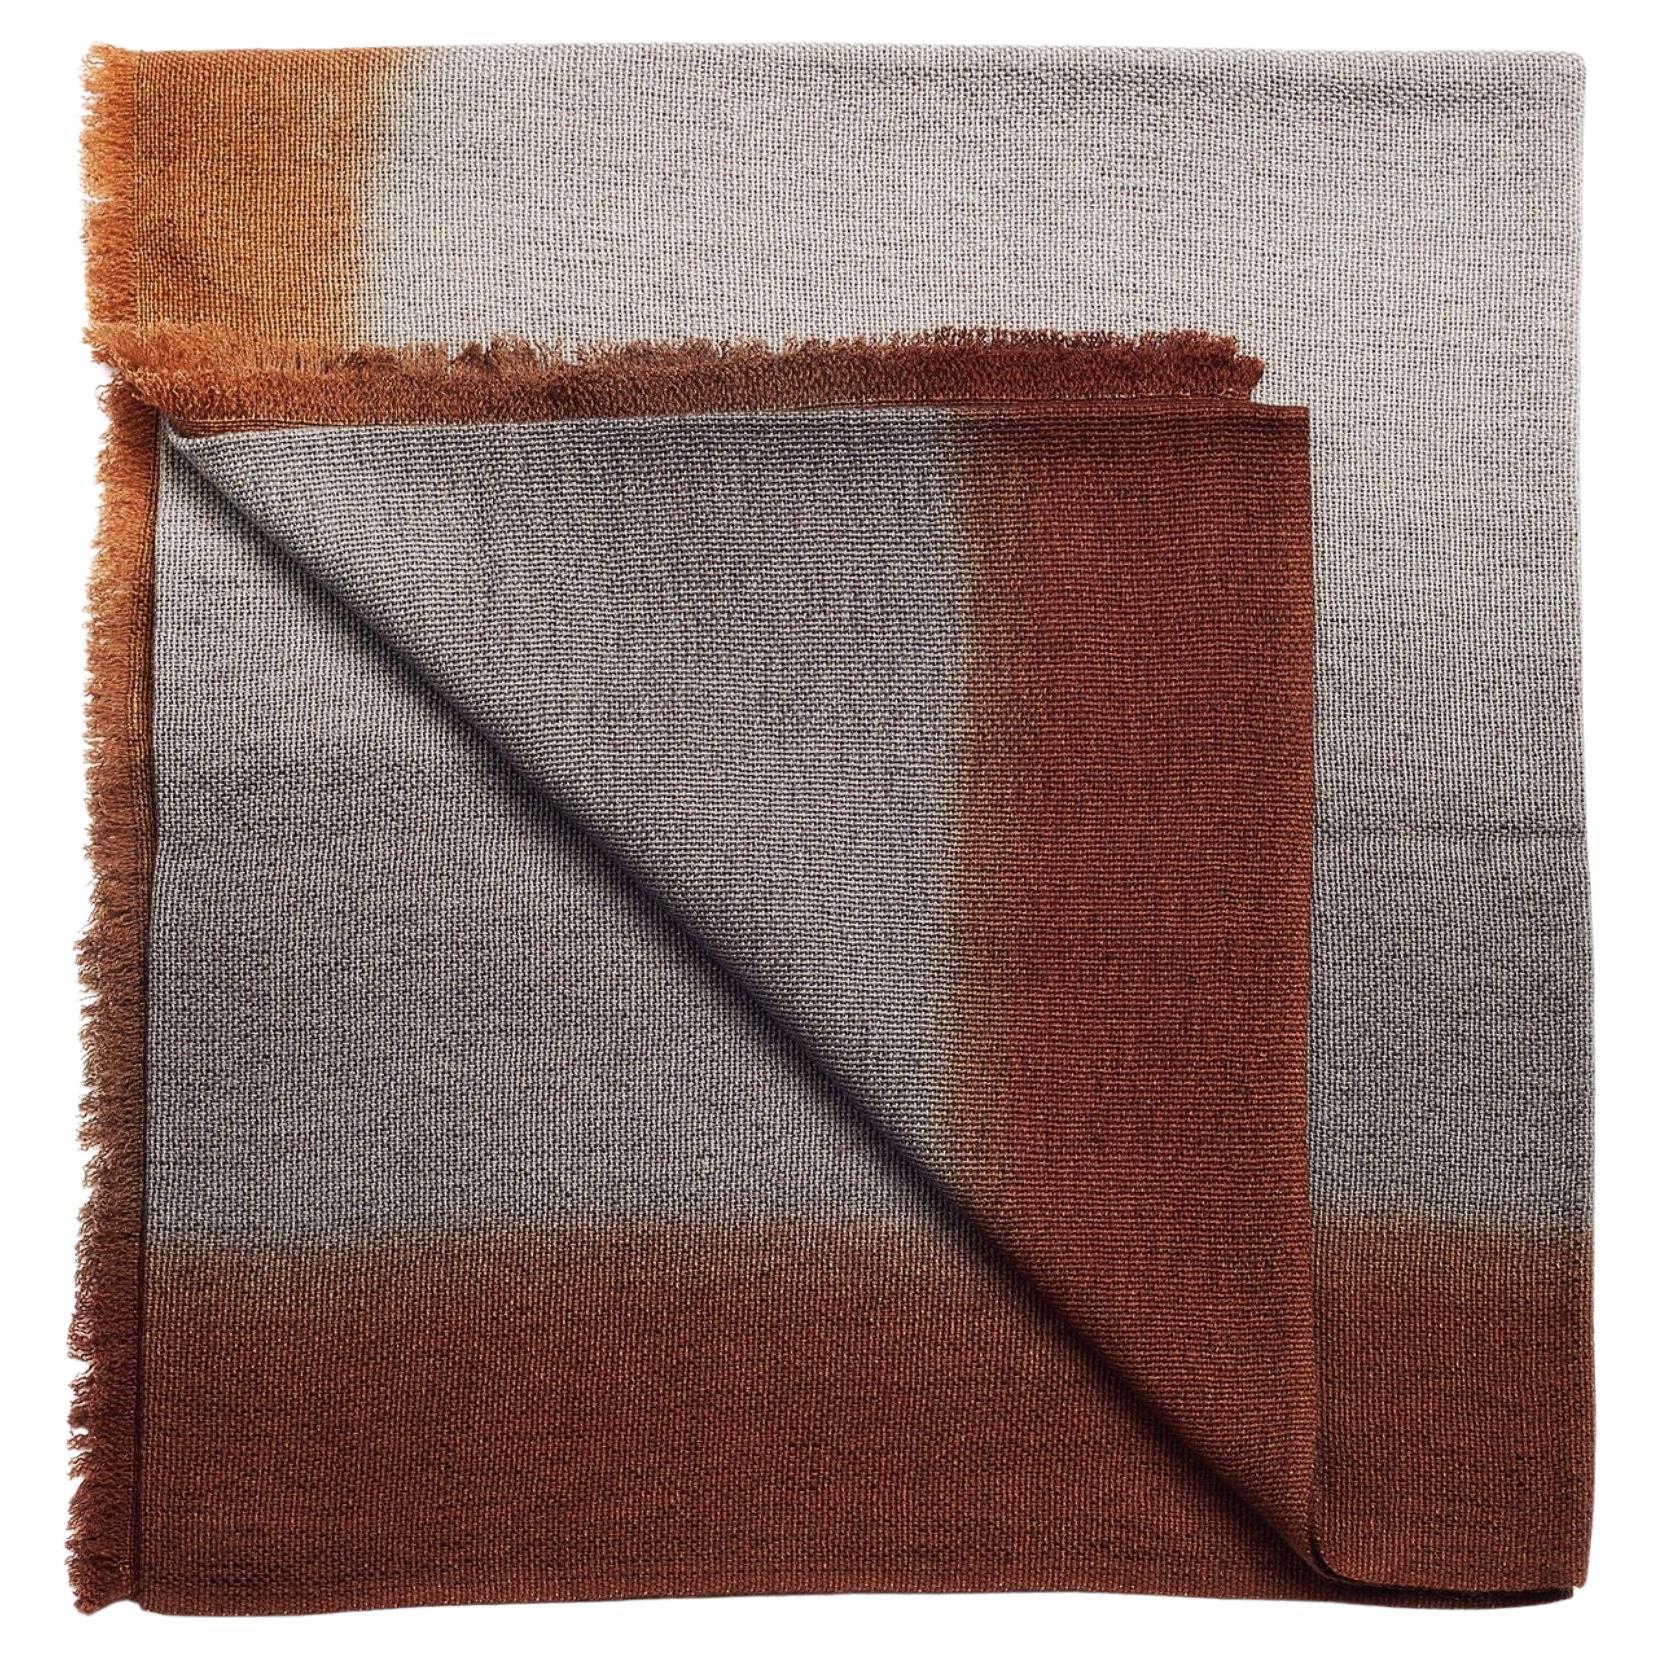 Simply Taupe Merino Throw Handwoven in Hand-spun Merino Using Warm Ombre Hues For Sale